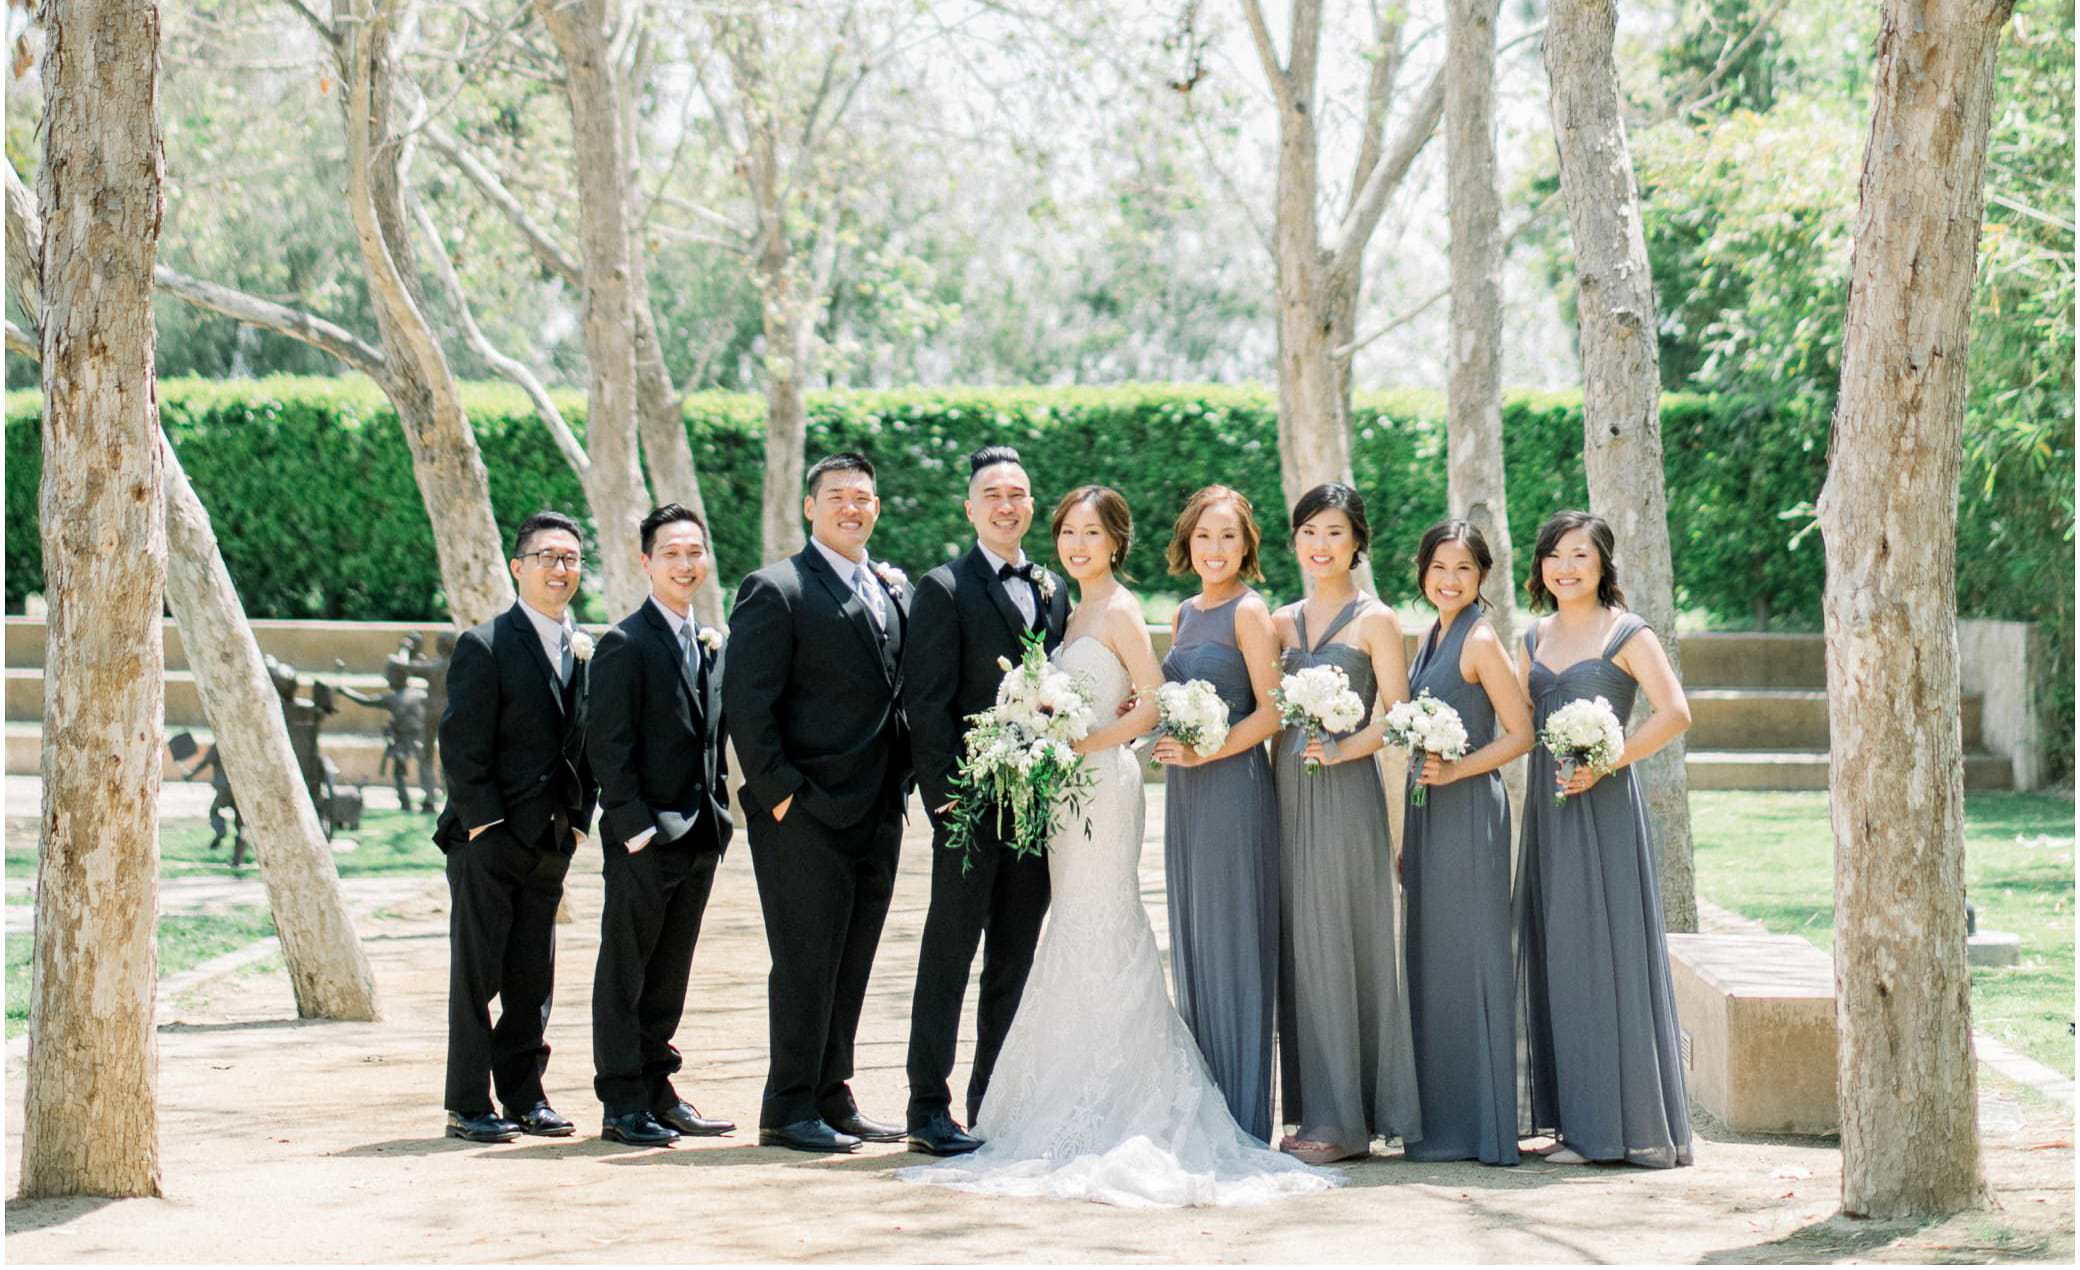 Rio Hondo by Wedgewood Weddings - Wedding Party at Joanne & Mike's celebration 